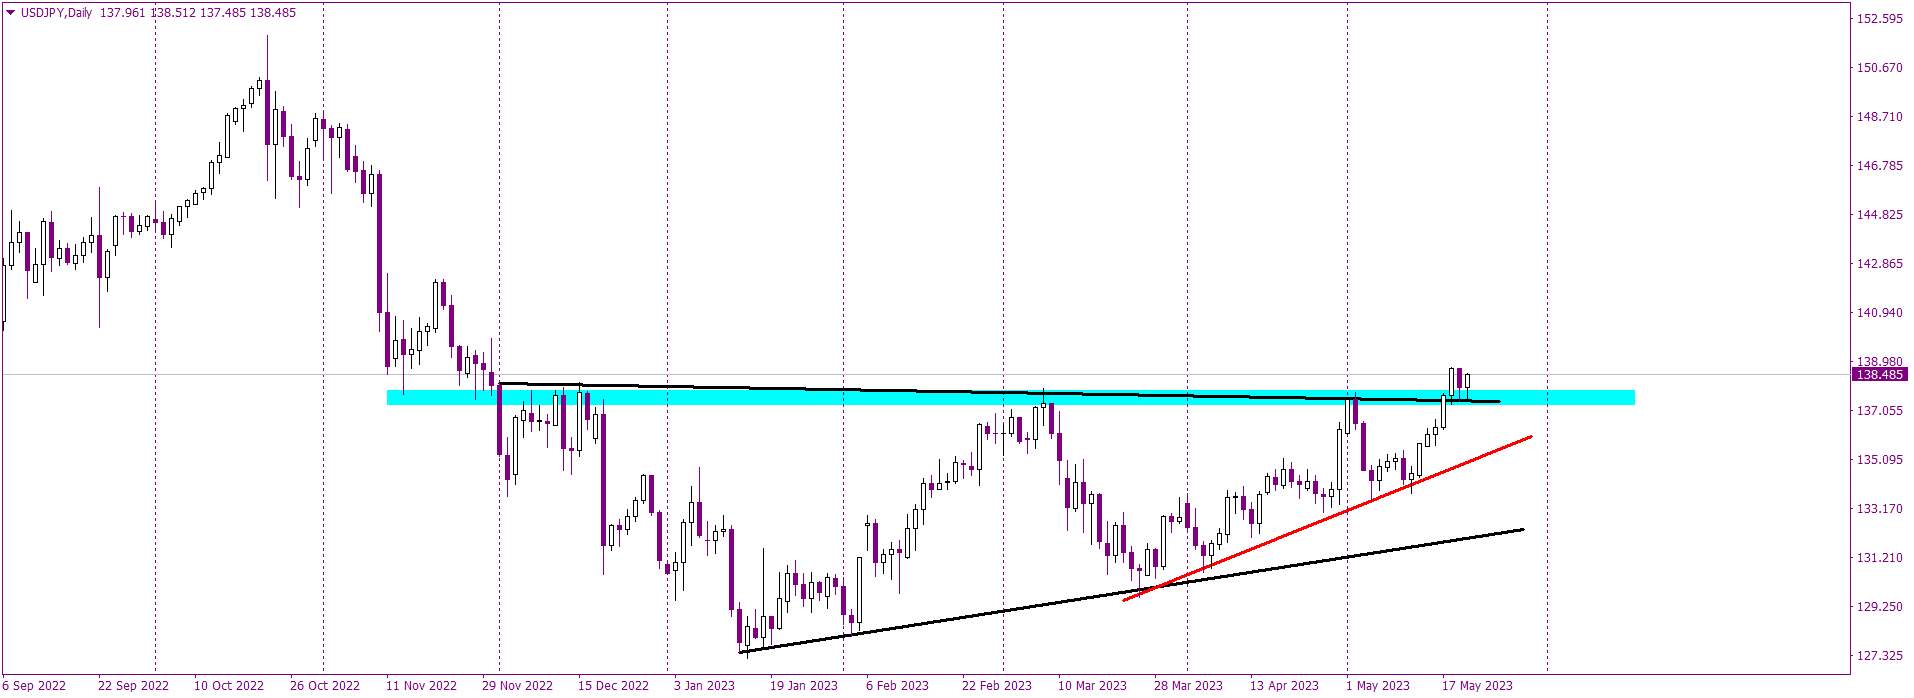 Successful Breakout: USD/JPY Continues to Surge